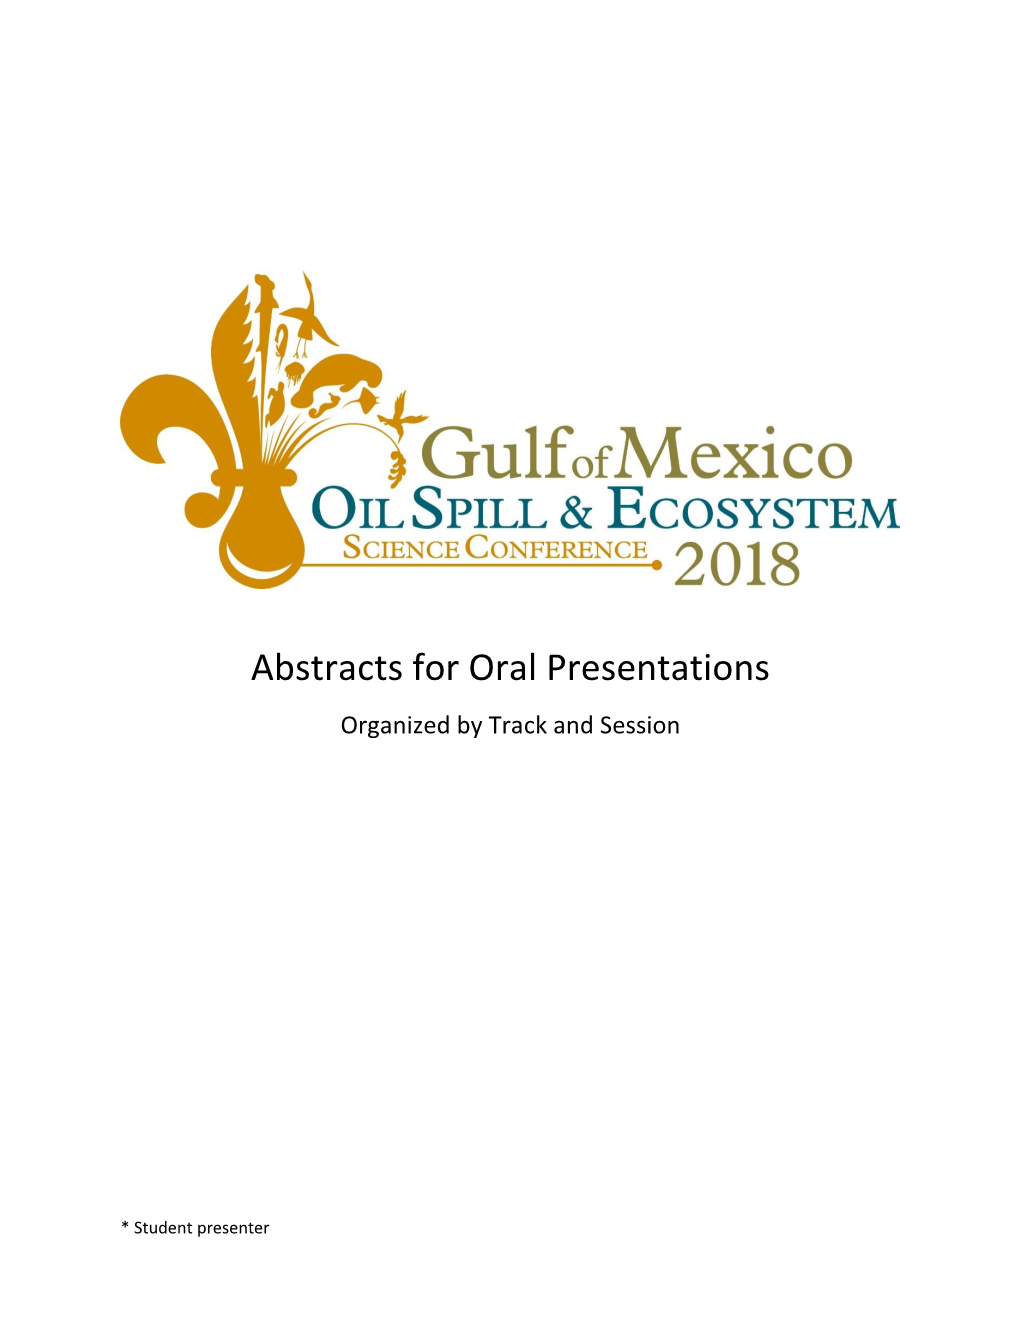 Abstracts for Oral Presentations Organized by Track and Session